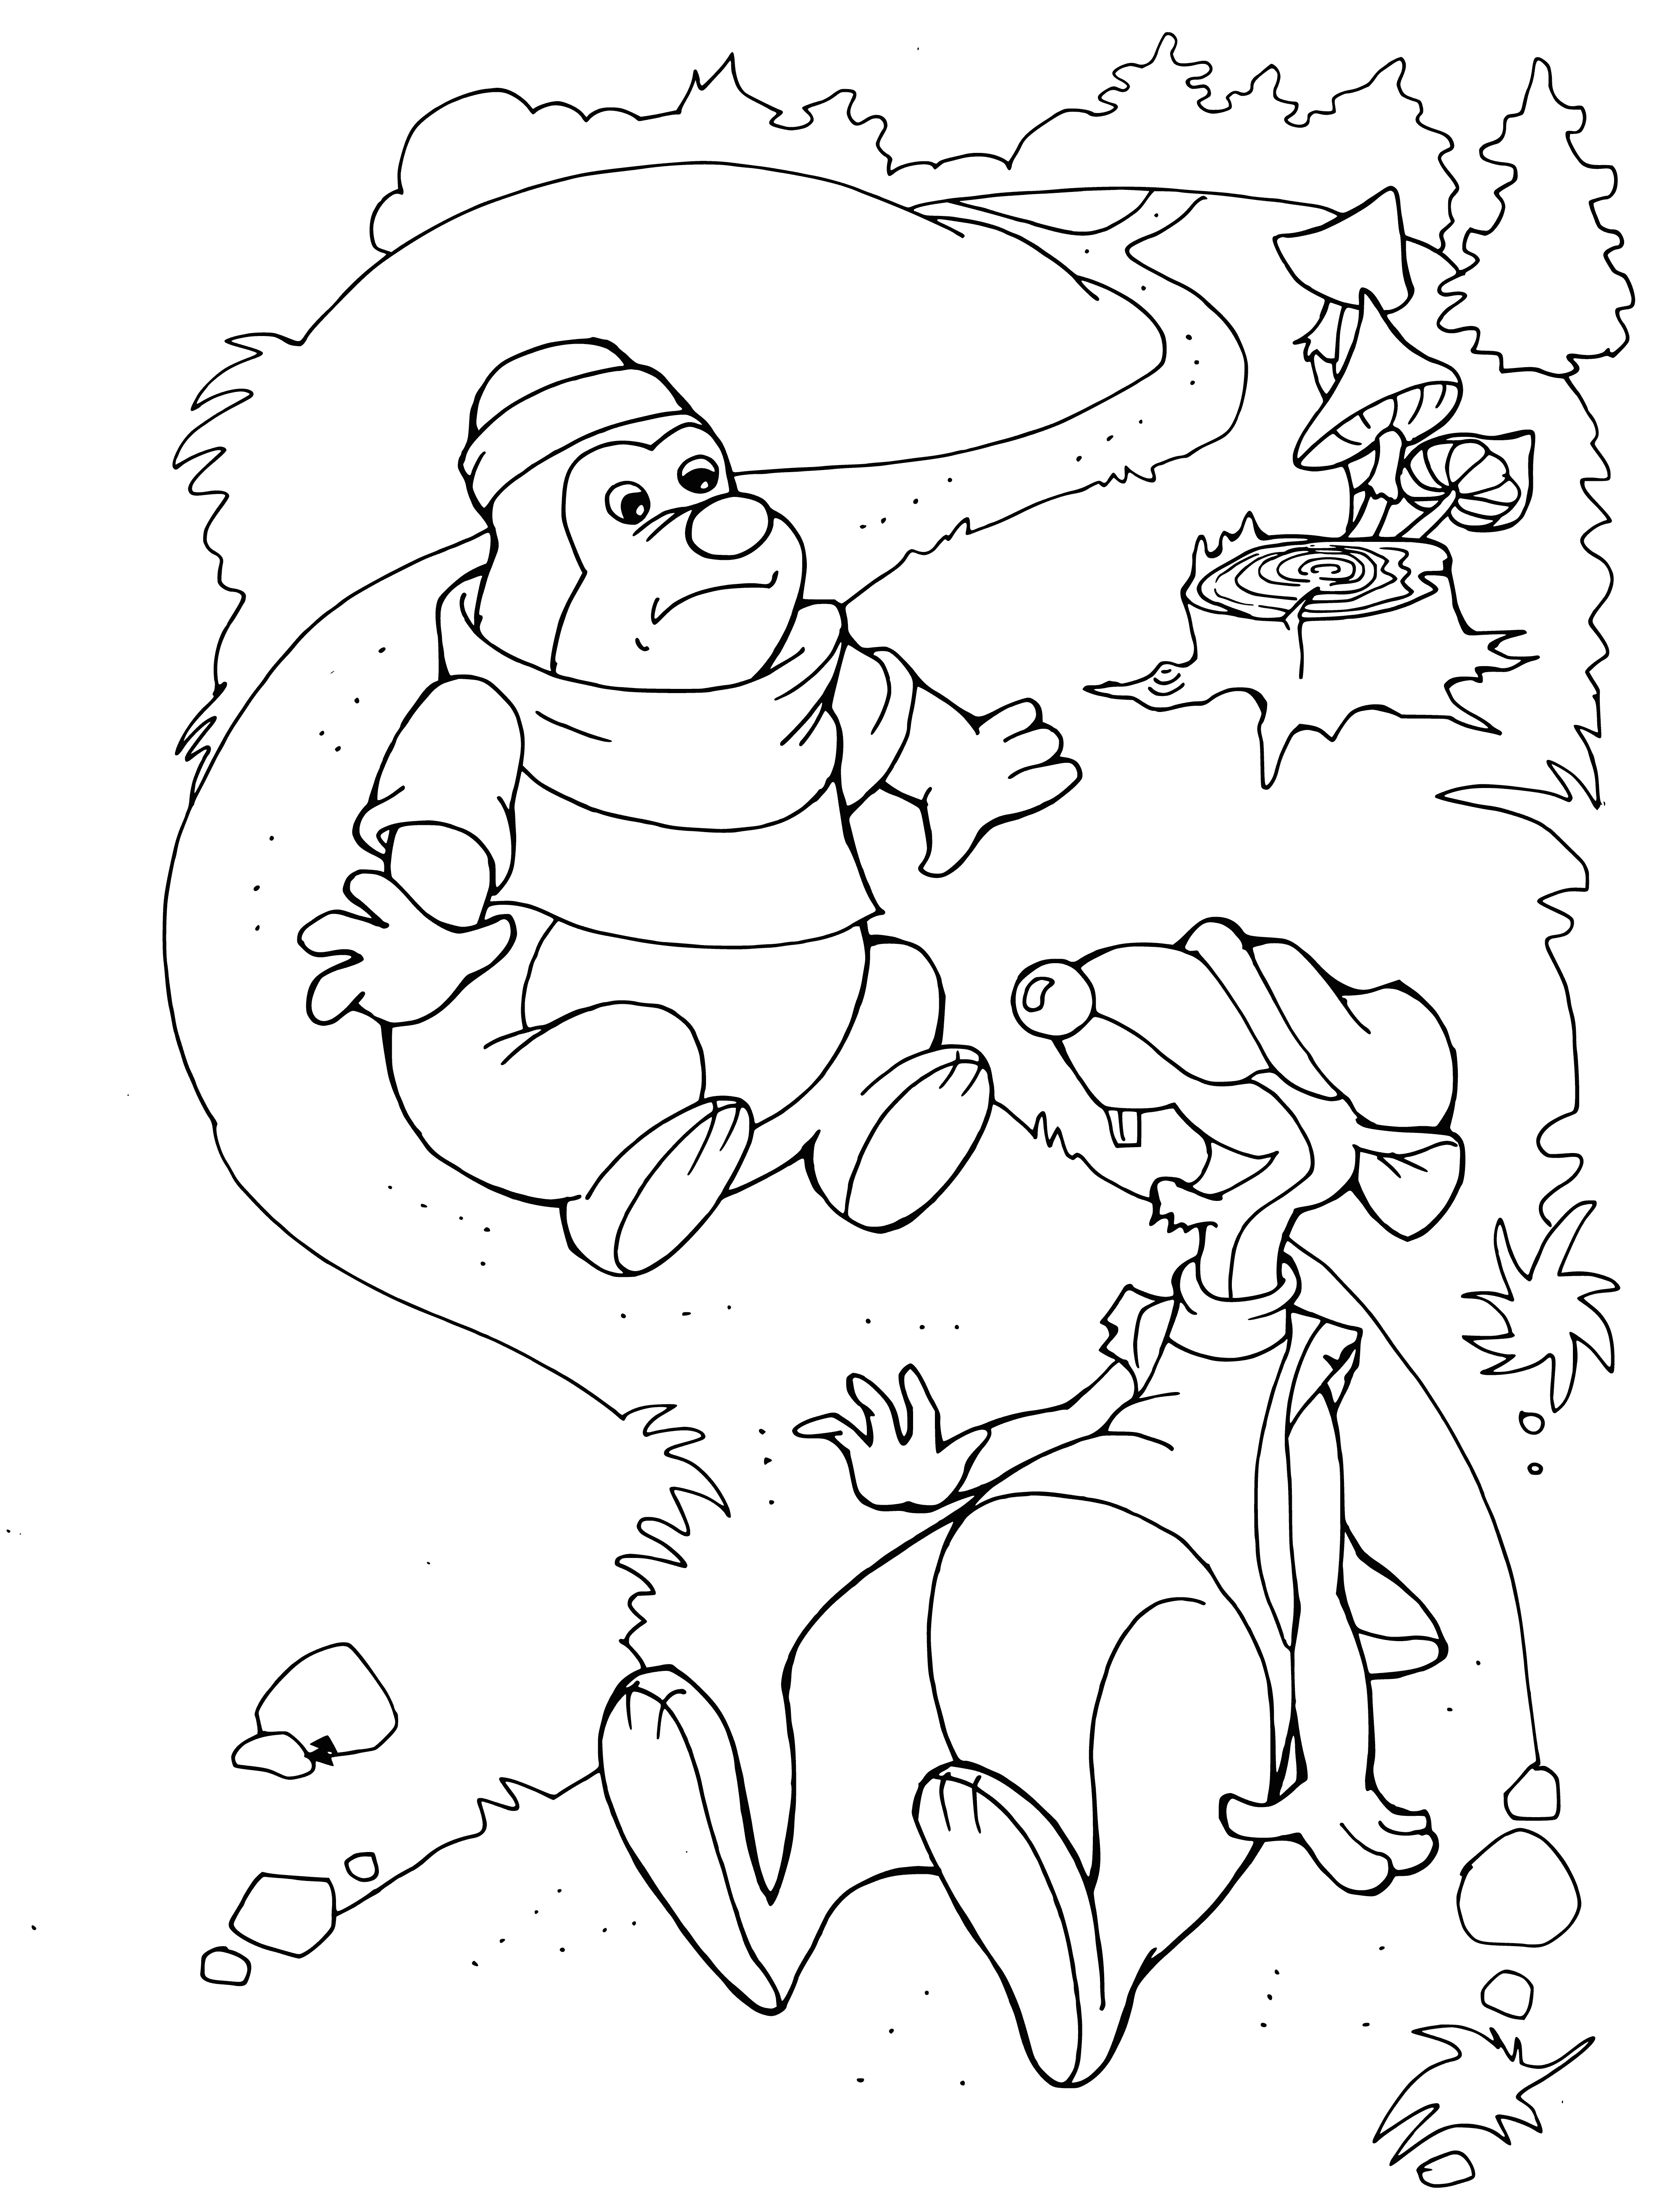 Fat Cat Helpers coloring page